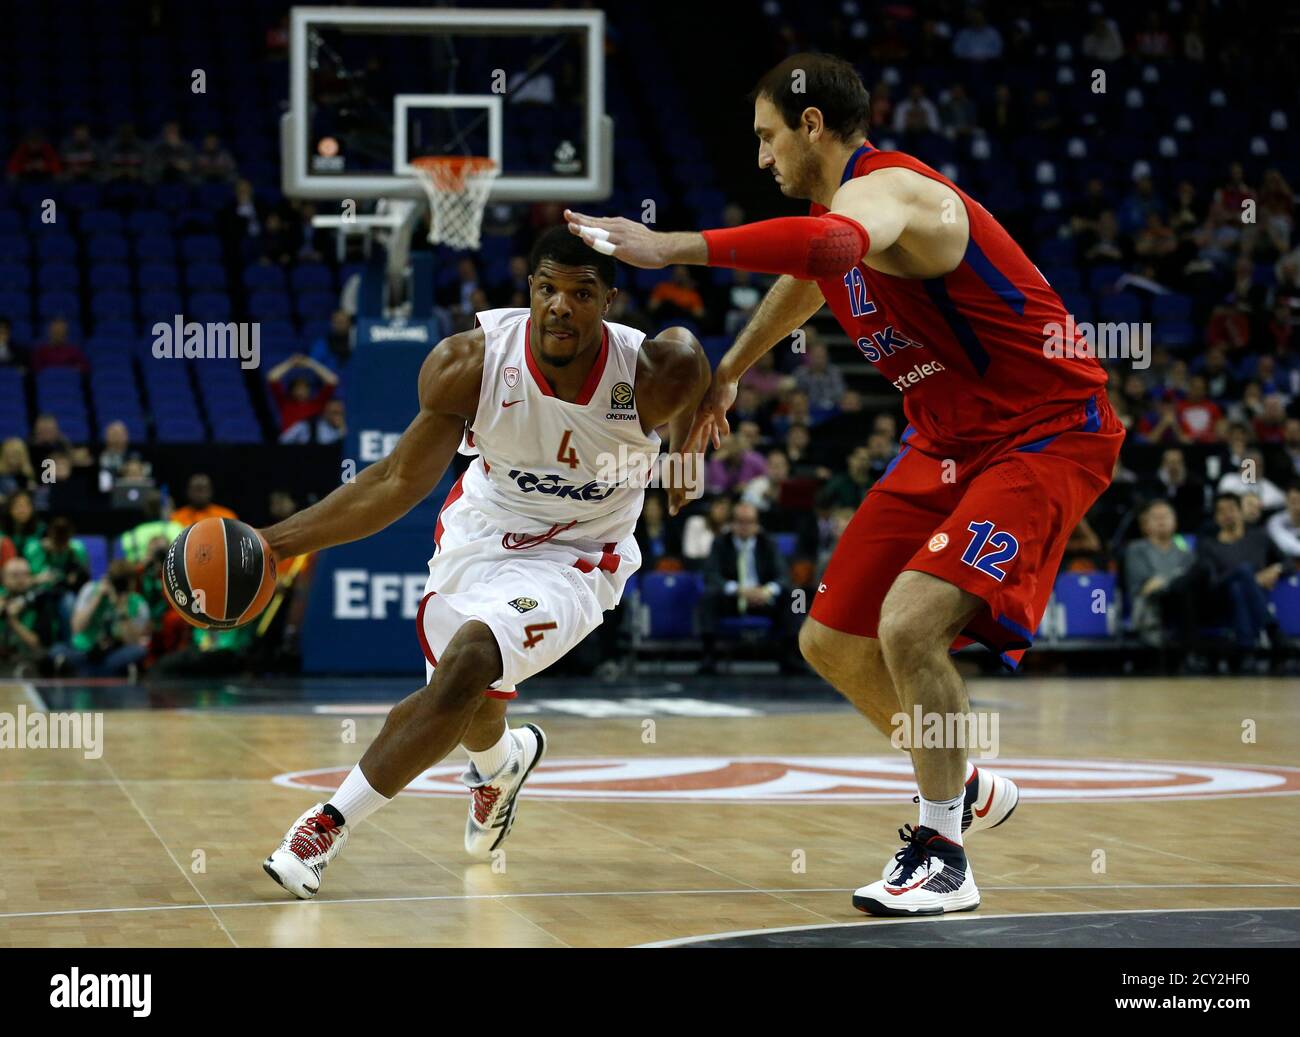 Olympiakos' Kyle Hines drives past CSKA Moscow's Nenad Krstic during their  Euroleague Final Four semi-final basketball game at the O2 Arena in London  May 10, 2013. REUTERS/Suzanne Plunkett (BRITAIN - Tags: SPORT